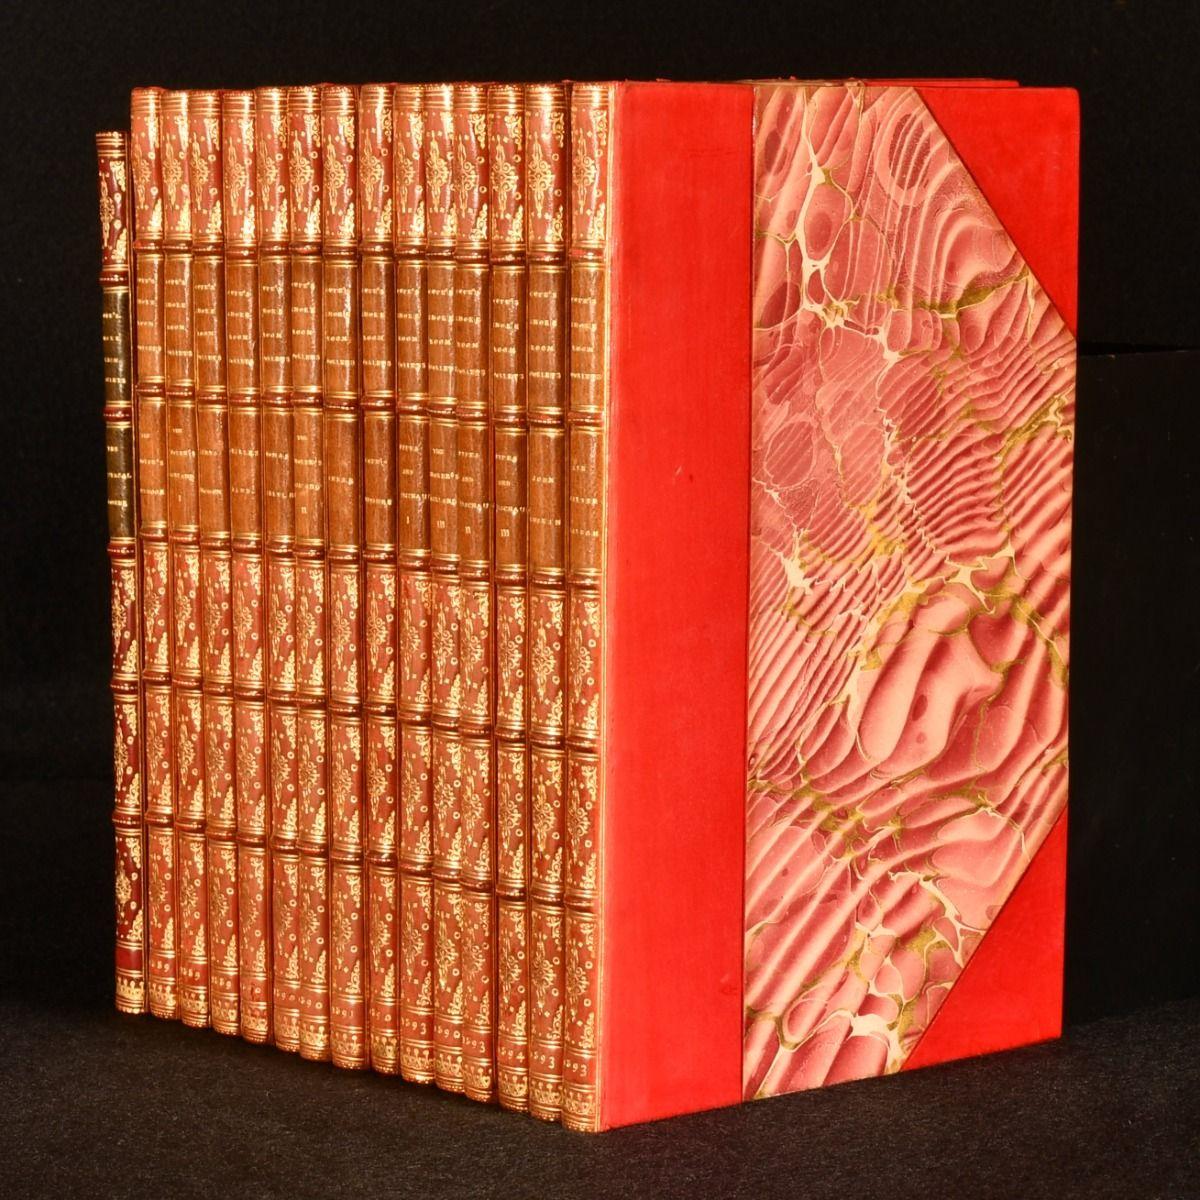 A finely bound set of the complete fifteen volumes of Cope Tobacco's 'Smoke-Room Booklets', an scarce to see complete set with the original wraps bound in.

A very scarce to see complete set of the 'Cope's Smoke-Room Booklets', including the very